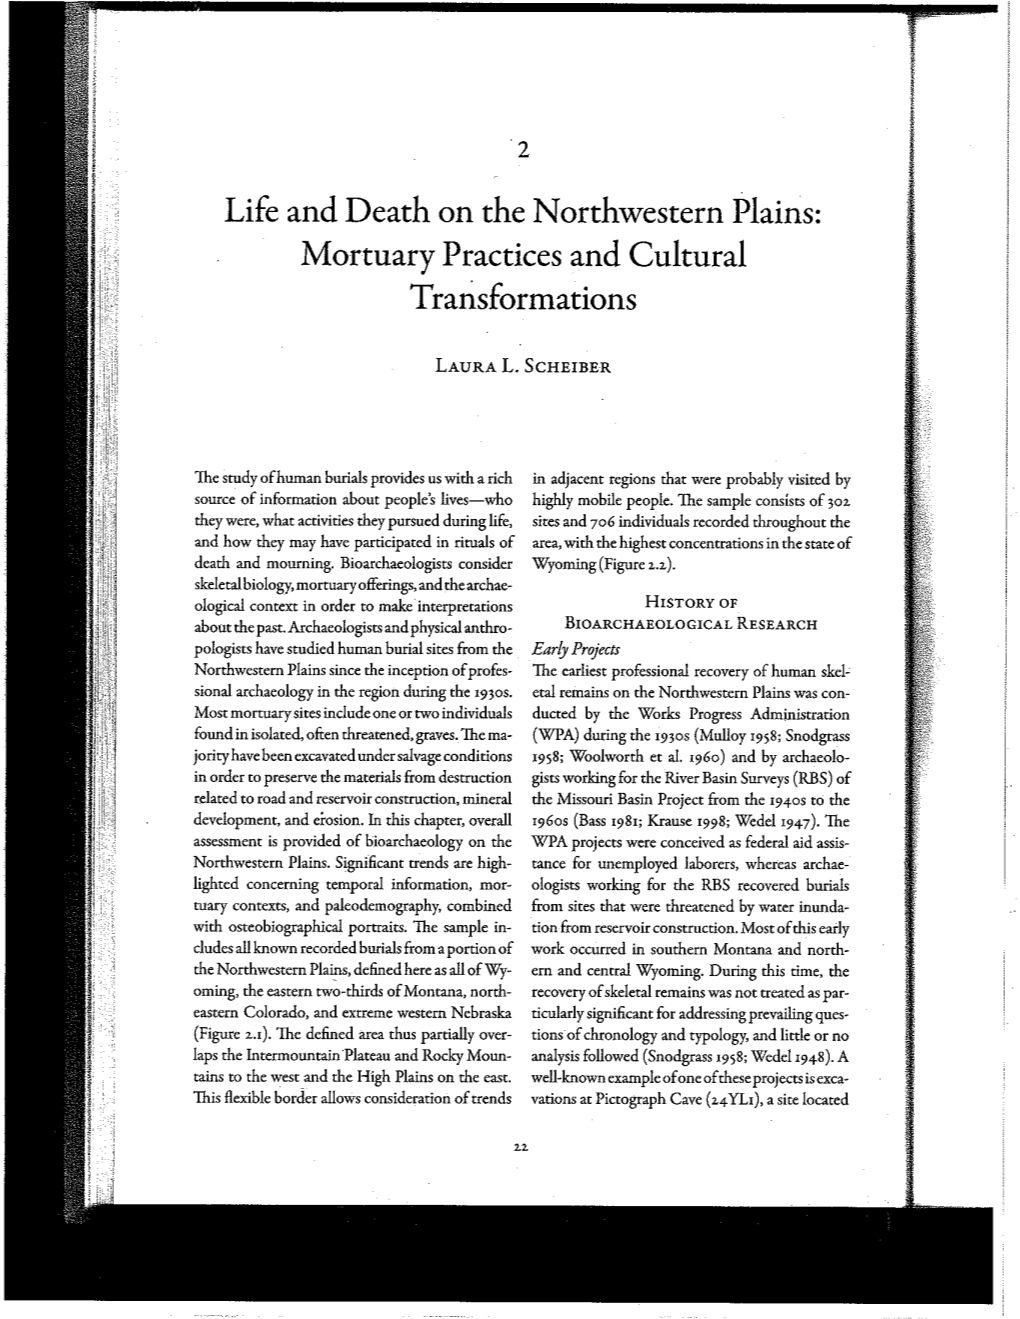 Life and Death on the Northwestern Plains: Mortuary Practices and Cultural Transformations